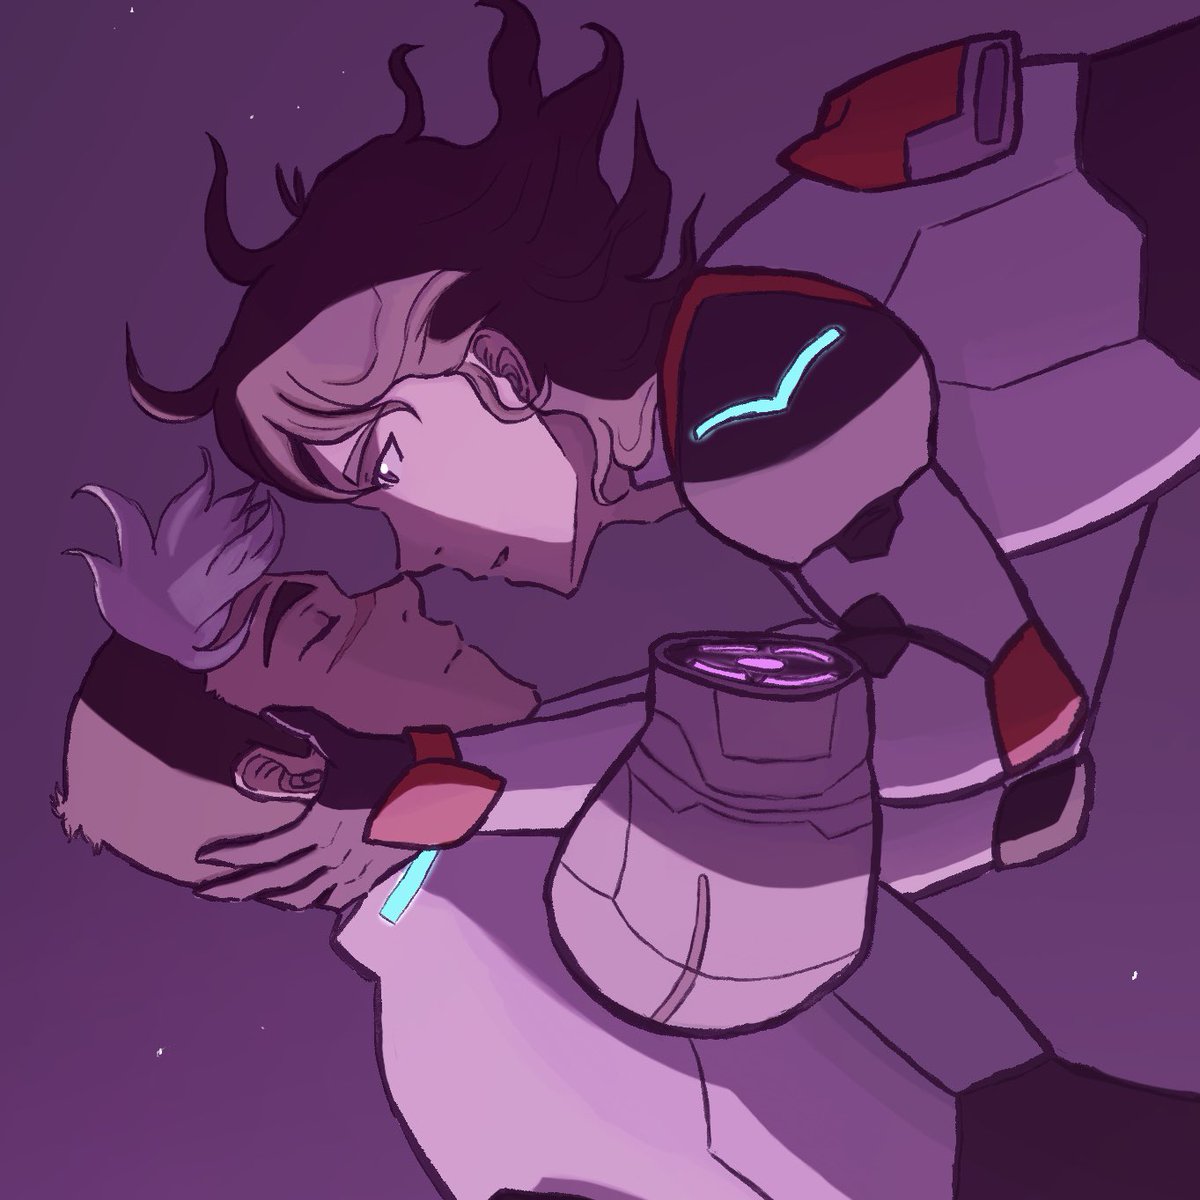 “as many times as it takes.”
.
.
.
.
.

Happy #sheith month ❤️🖤❤️🖤❤️🖤